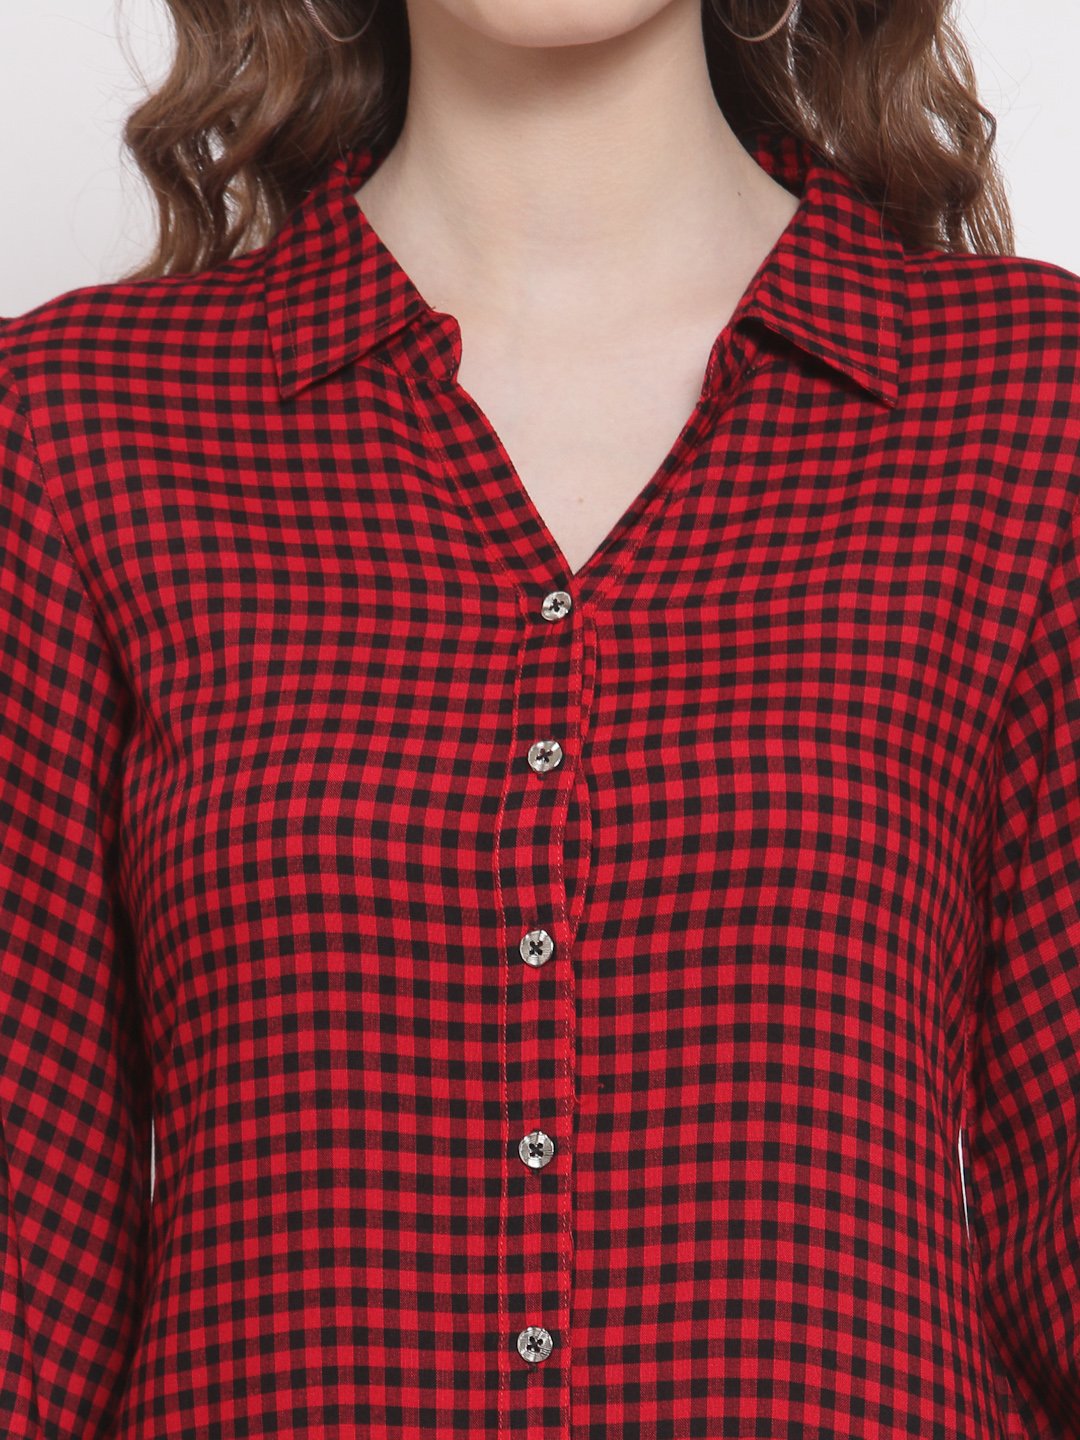 Terquois Red Checks Casual Dress Dresses TERQUOIS   